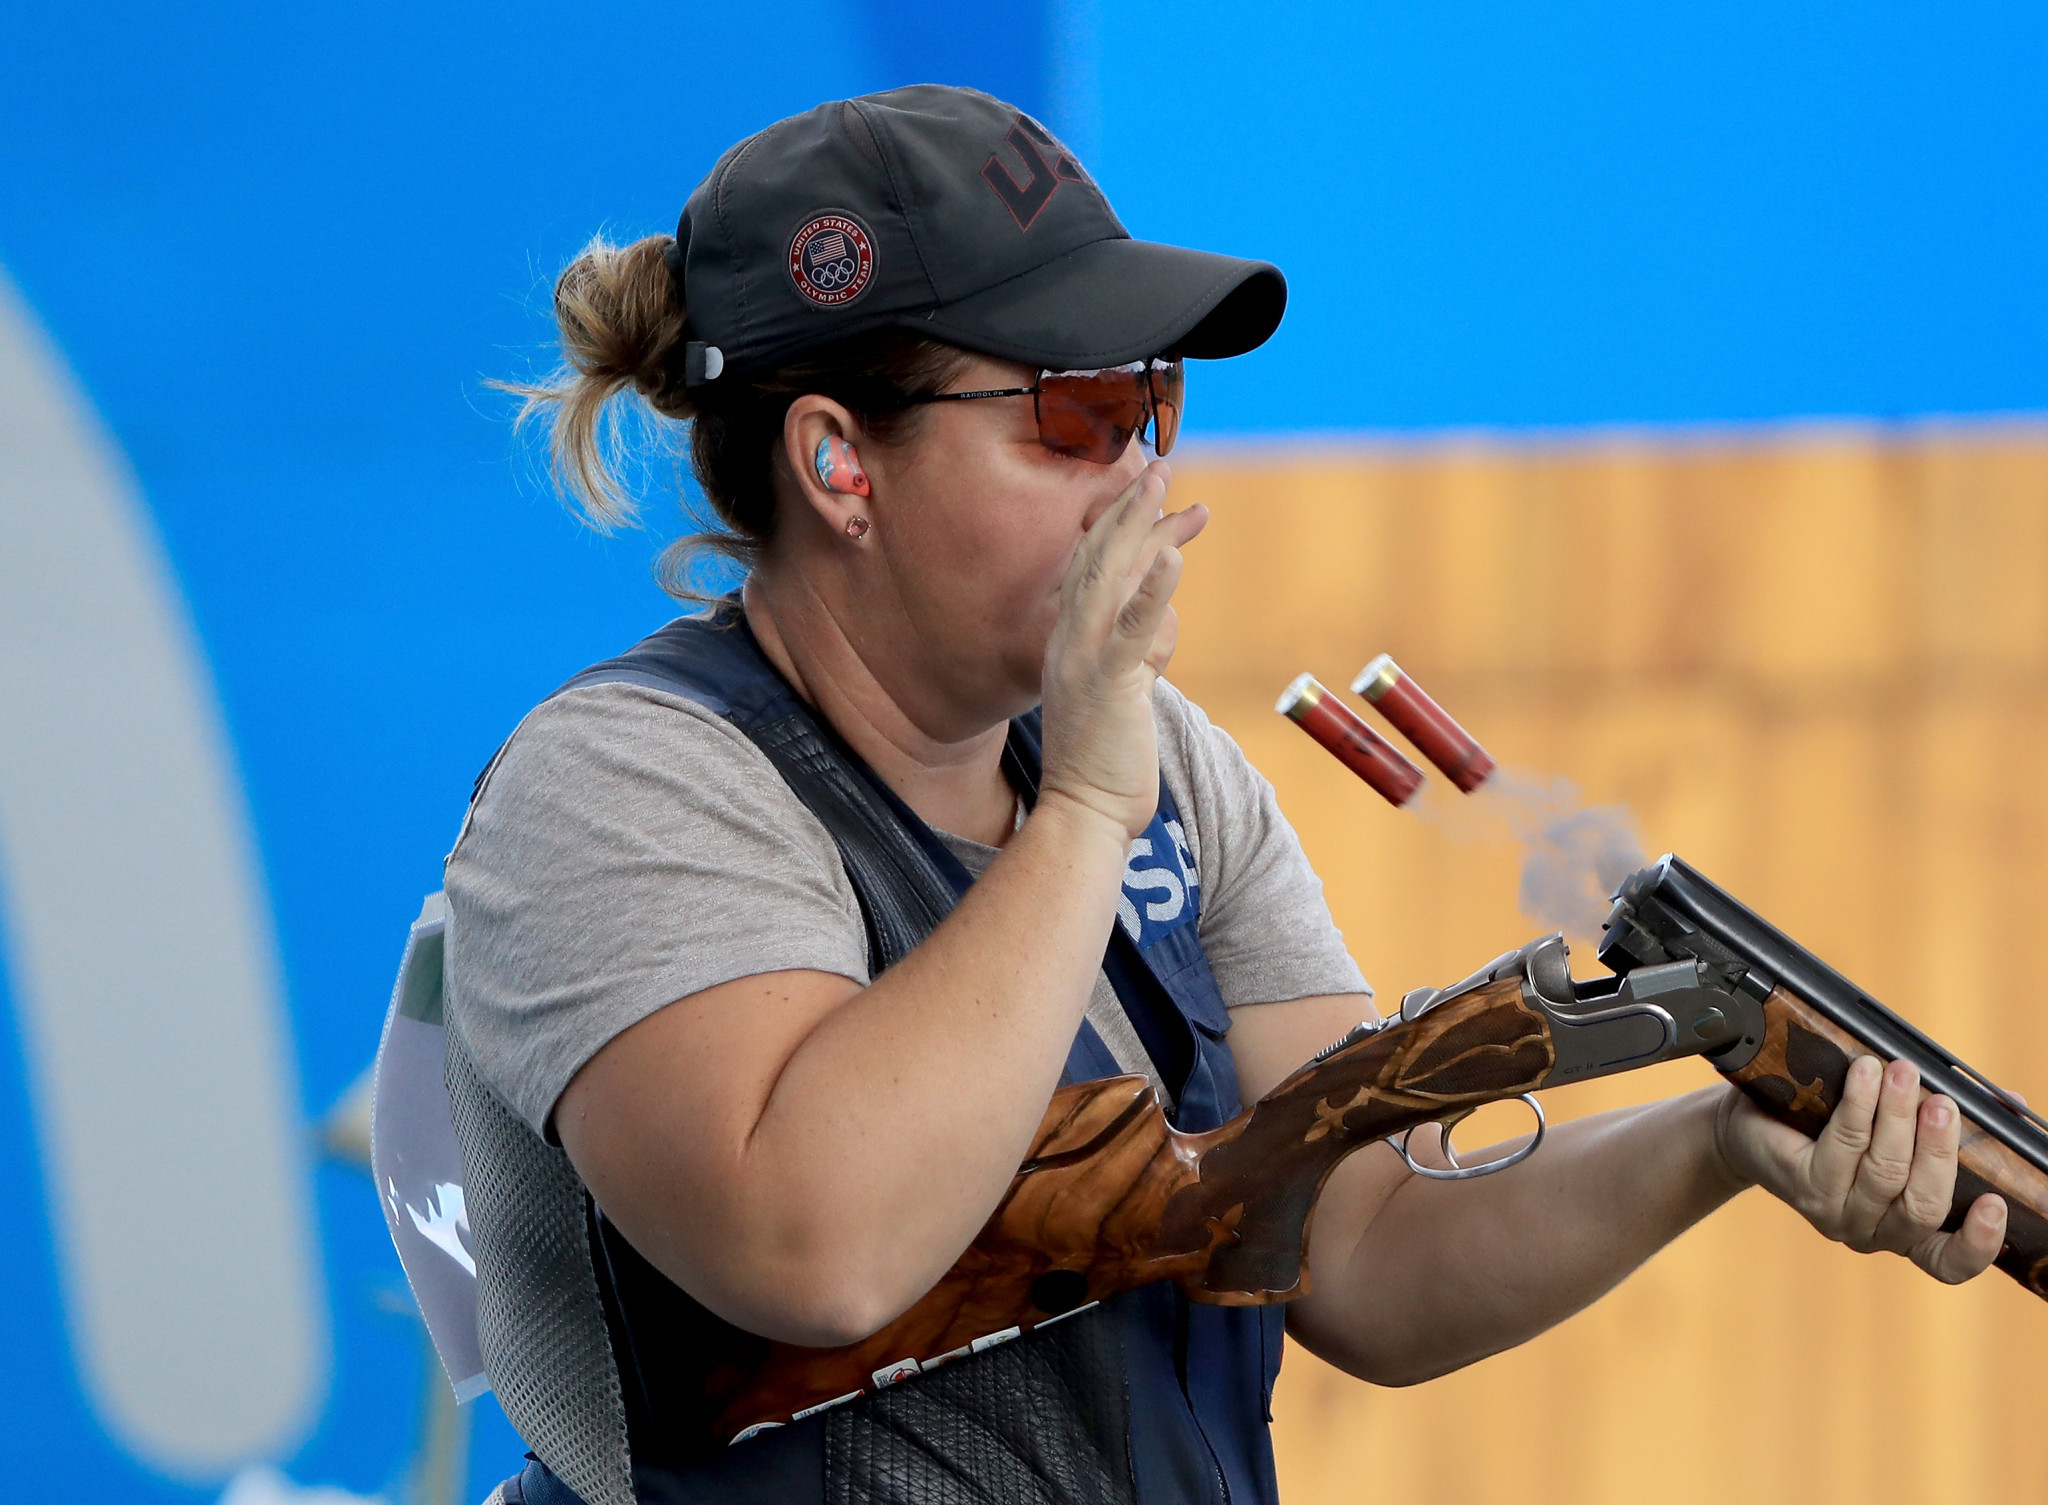 The United States' Kim Rhode will be aiming to defend her women's skeet title ©Getty Images